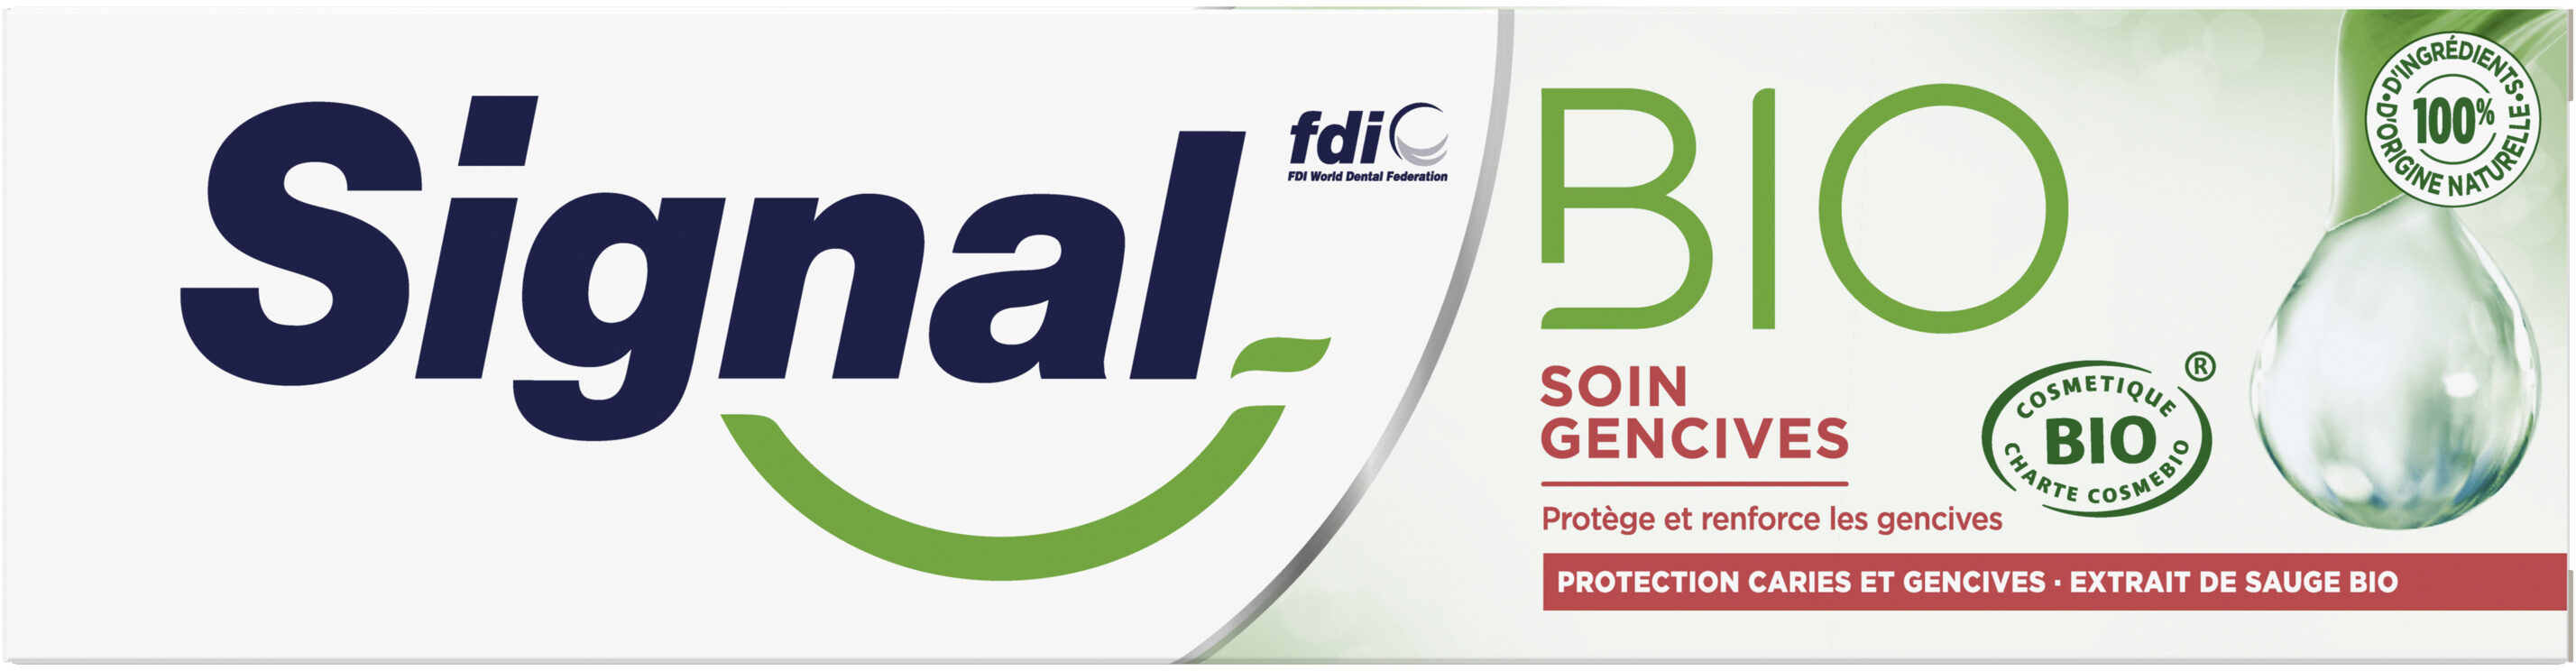 Signal Dentifrice Bio Soin Gencives - Product - fr